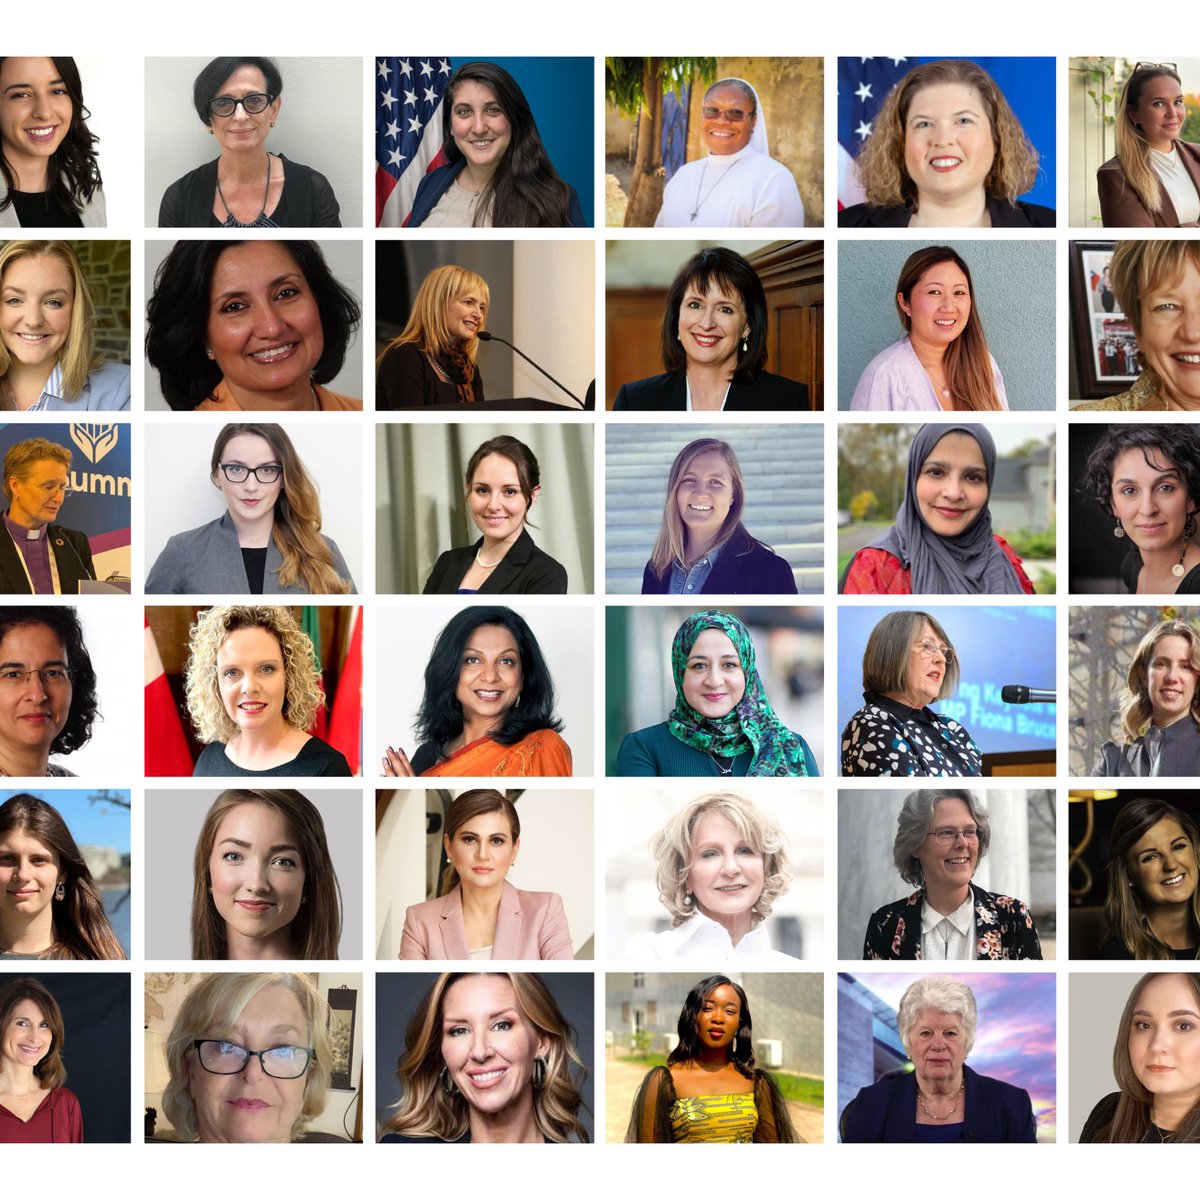 Happy #InternationalWomensDay! We celebrate all IRF #womenleaders fighting for the rights of women everywhere. @IrfRoundtable is honored to echo your inspiring work. We stand today in solidarity with all women persecuted for their #religion, #belief or #conscience.